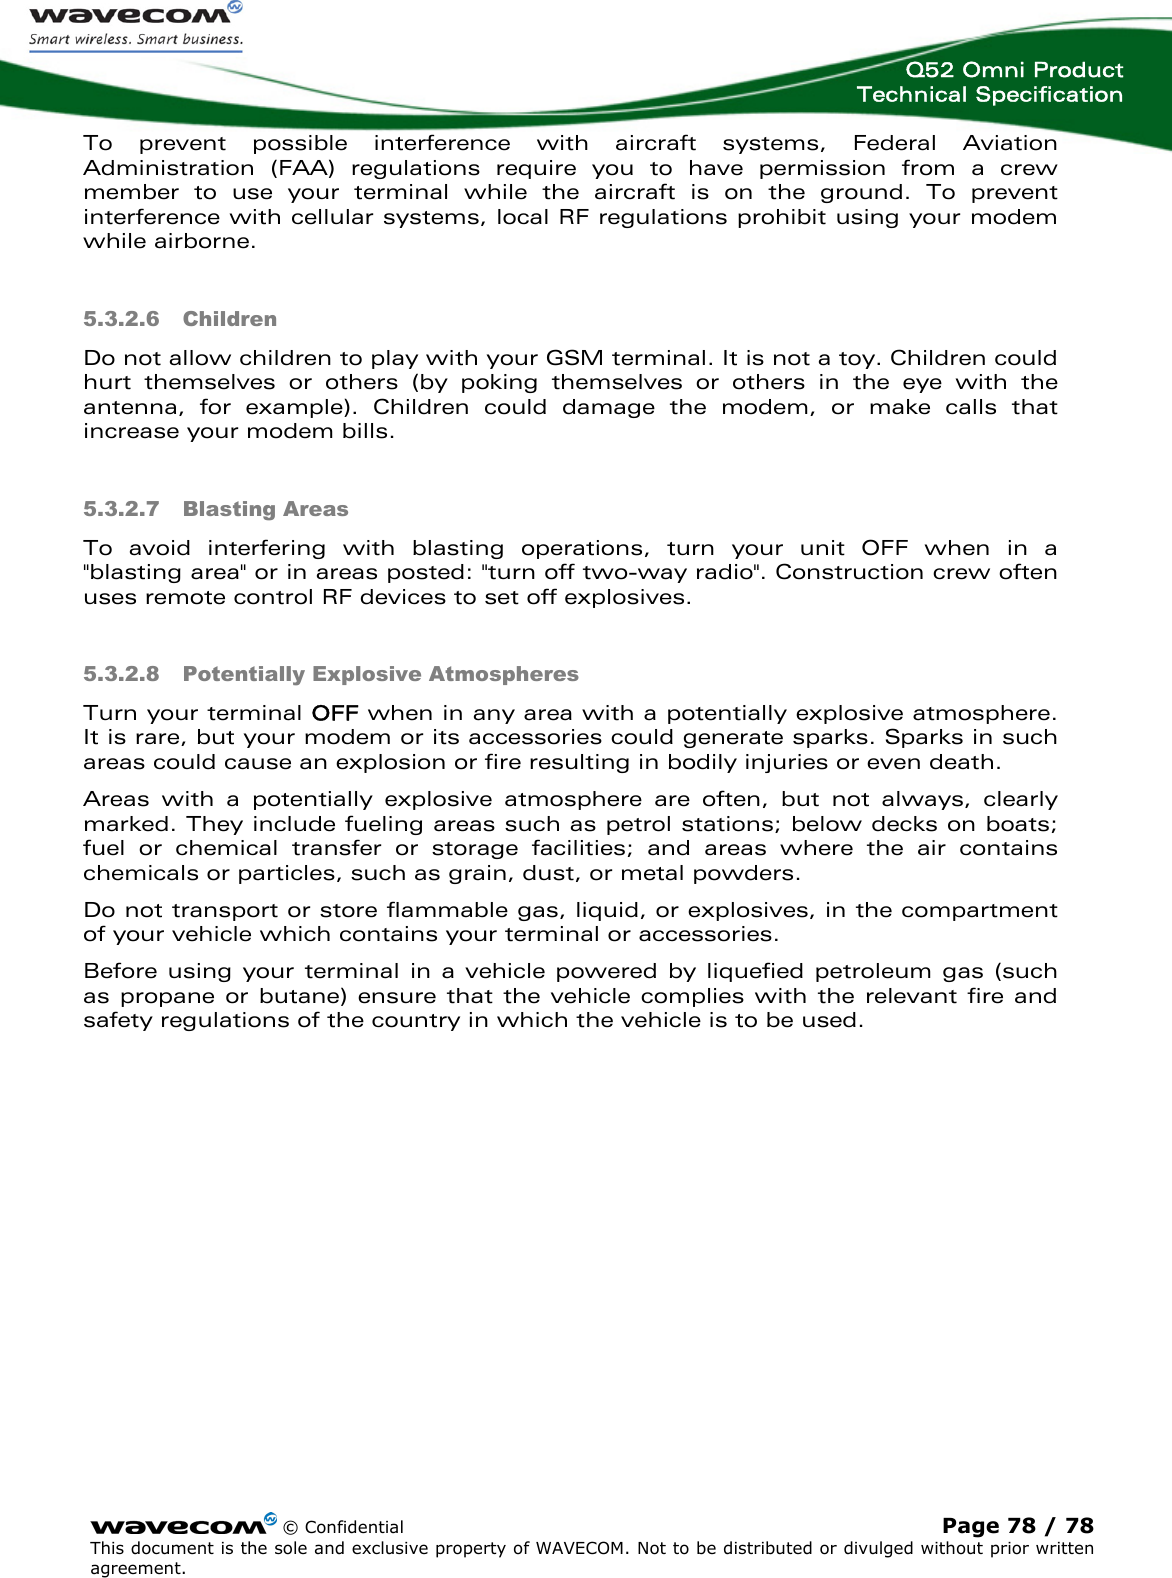  Q52 Omni Product Technical Specification    © Confidential Page 78 / 78 This document is the sole and exclusive property of WAVECOM. Not to be distributed or divulged without prior written agreement.  To prevent possible interference with aircraft systems, Federal Aviation Administration (FAA) regulations require you to have permission from a crew member to use your terminal while the aircraft is on the ground. To prevent interference with cellular systems, local RF regulations prohibit using your modem while airborne. 5.3.2.6 Children Do not allow children to play with your GSM terminal. It is not a toy. Children could hurt themselves or others (by poking themselves or others in the eye with the antenna, for example). Children could damage the modem, or make calls that increase your modem bills. 5.3.2.7 Blasting Areas To avoid interfering with blasting operations, turn your unit OFF when in a &quot;blasting area&quot; or in areas posted: &quot;turn off two-way radio&quot;. Construction crew often uses remote control RF devices to set off explosives. 5.3.2.8 Potentially Explosive Atmospheres Turn your terminal OFF when in any area with a potentially explosive atmosphere. It is rare, but your modem or its accessories could generate sparks. Sparks in such areas could cause an explosion or fire resulting in bodily injuries or even death. Areas with a potentially explosive atmosphere are often, but not always, clearly marked. They include fueling areas such as petrol stations; below decks on boats; fuel or chemical transfer or storage facilities; and areas where the air contains chemicals or particles, such as grain, dust, or metal powders. Do not transport or store flammable gas, liquid, or explosives, in the compartment of your vehicle which contains your terminal or accessories. Before using your terminal in a vehicle powered by liquefied petroleum gas (such as propane or butane) ensure that the vehicle complies with the relevant fire and safety regulations of the country in which the vehicle is to be used. 